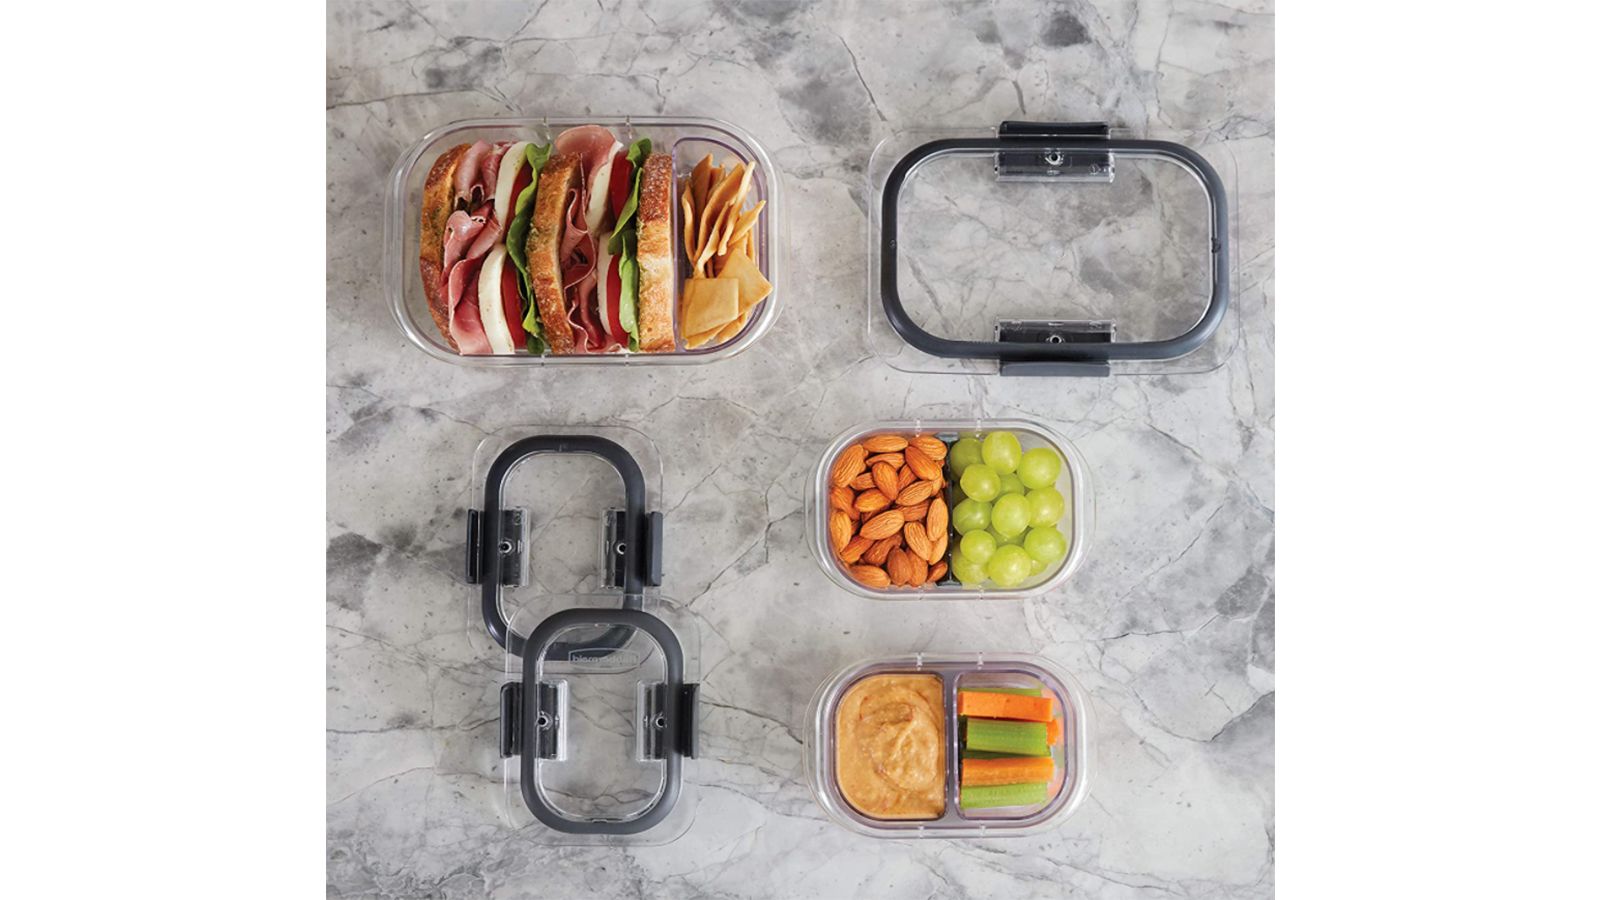 Meal prep containers do not have to be expensive. I purchased